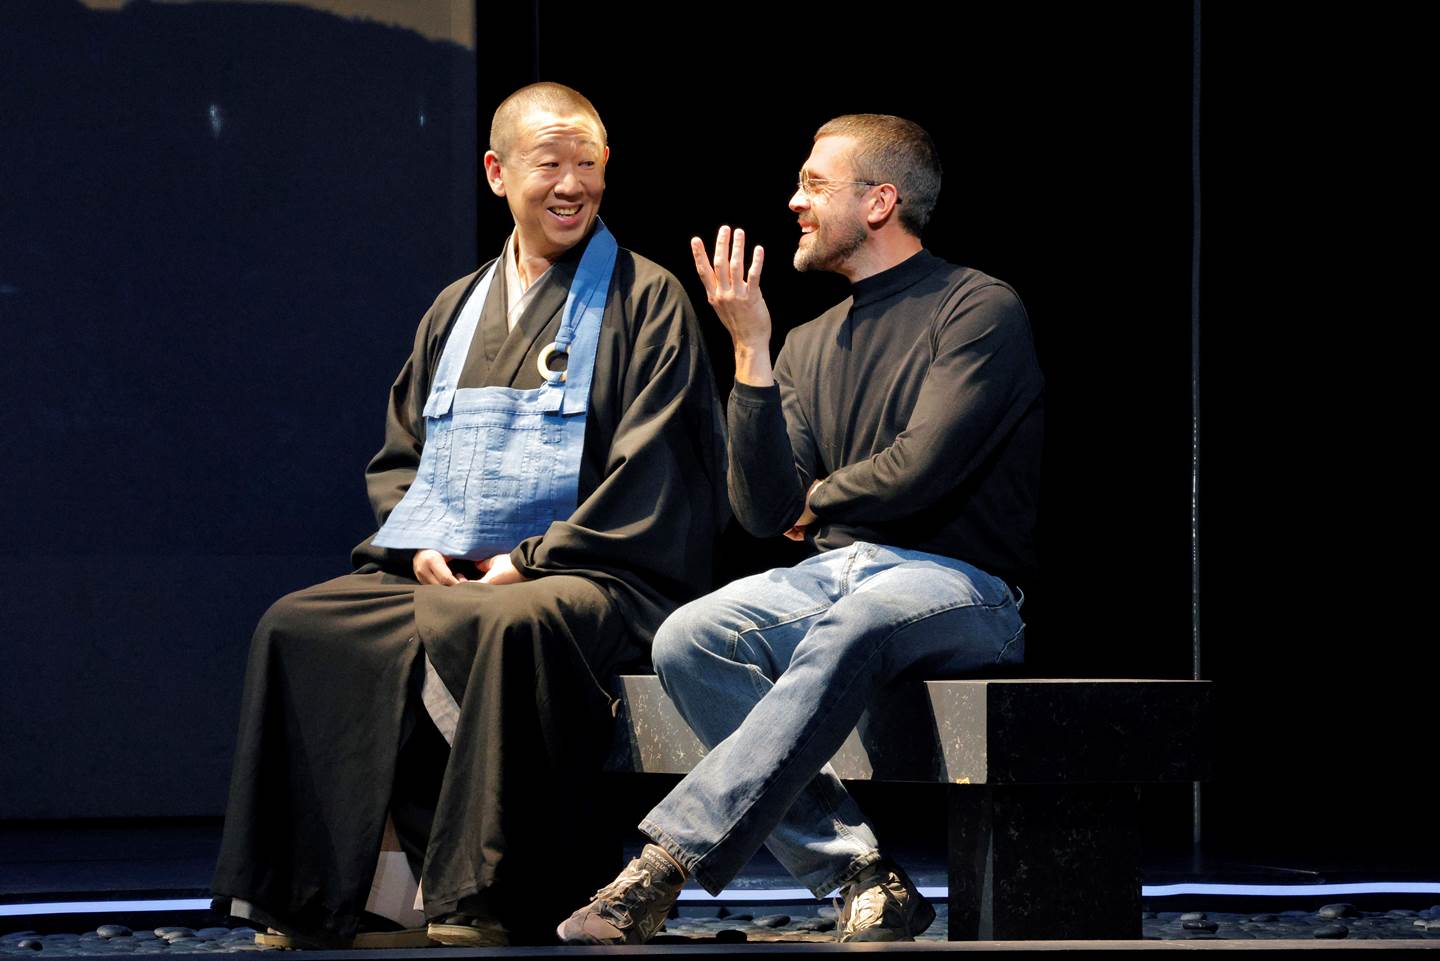 two men on stage talking and smiling while seated.